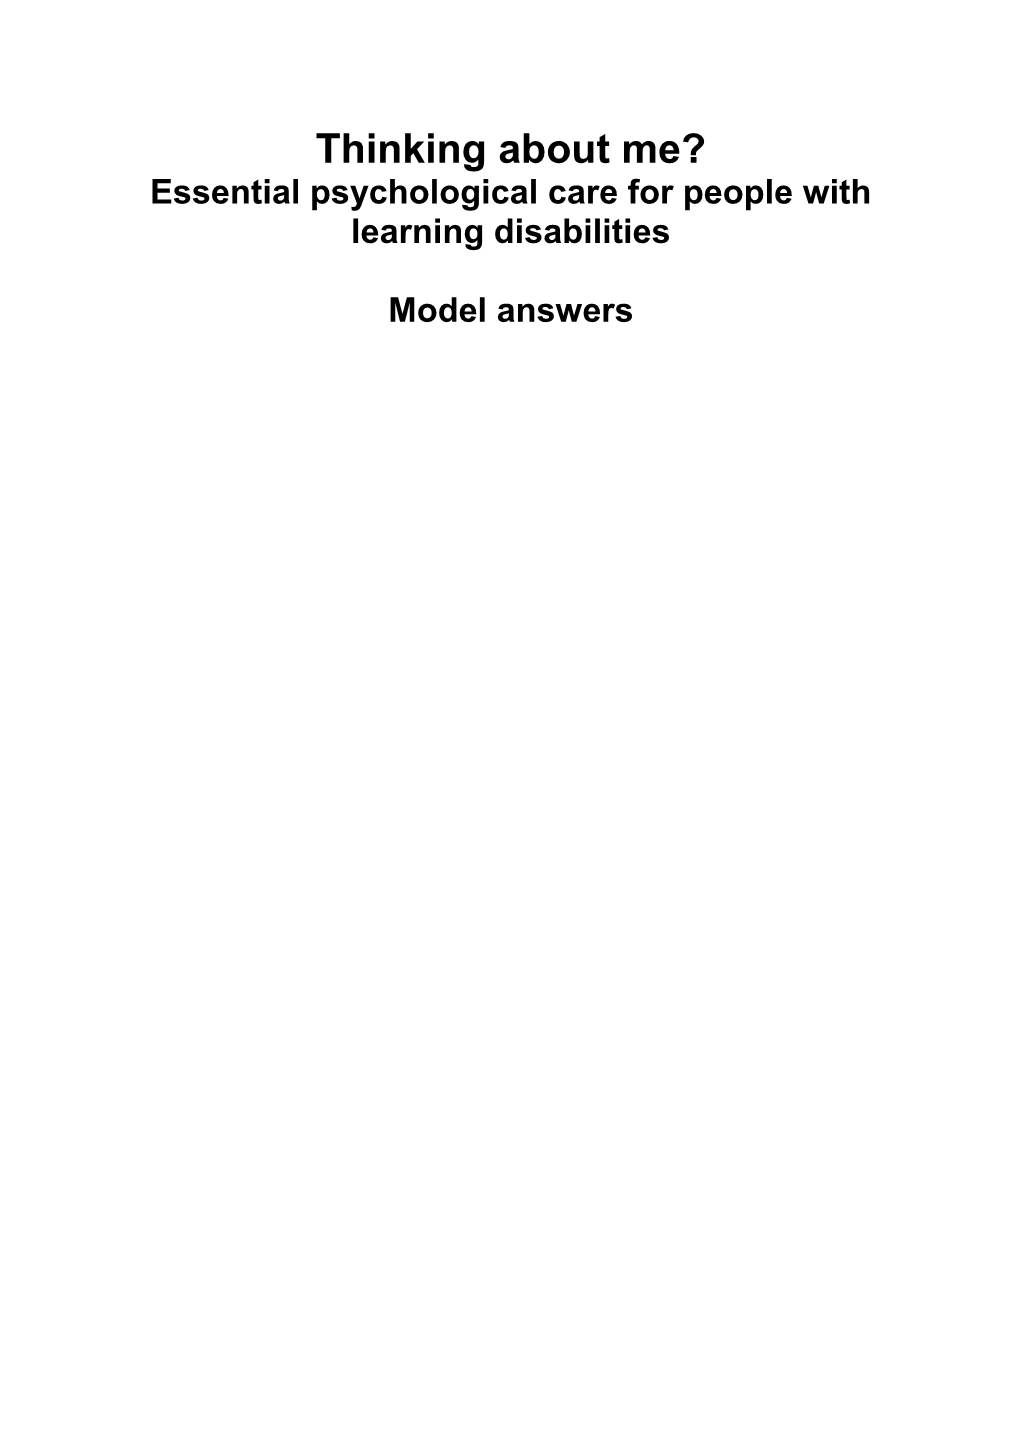 Essential Psychological Care for People with Learning Disabilities